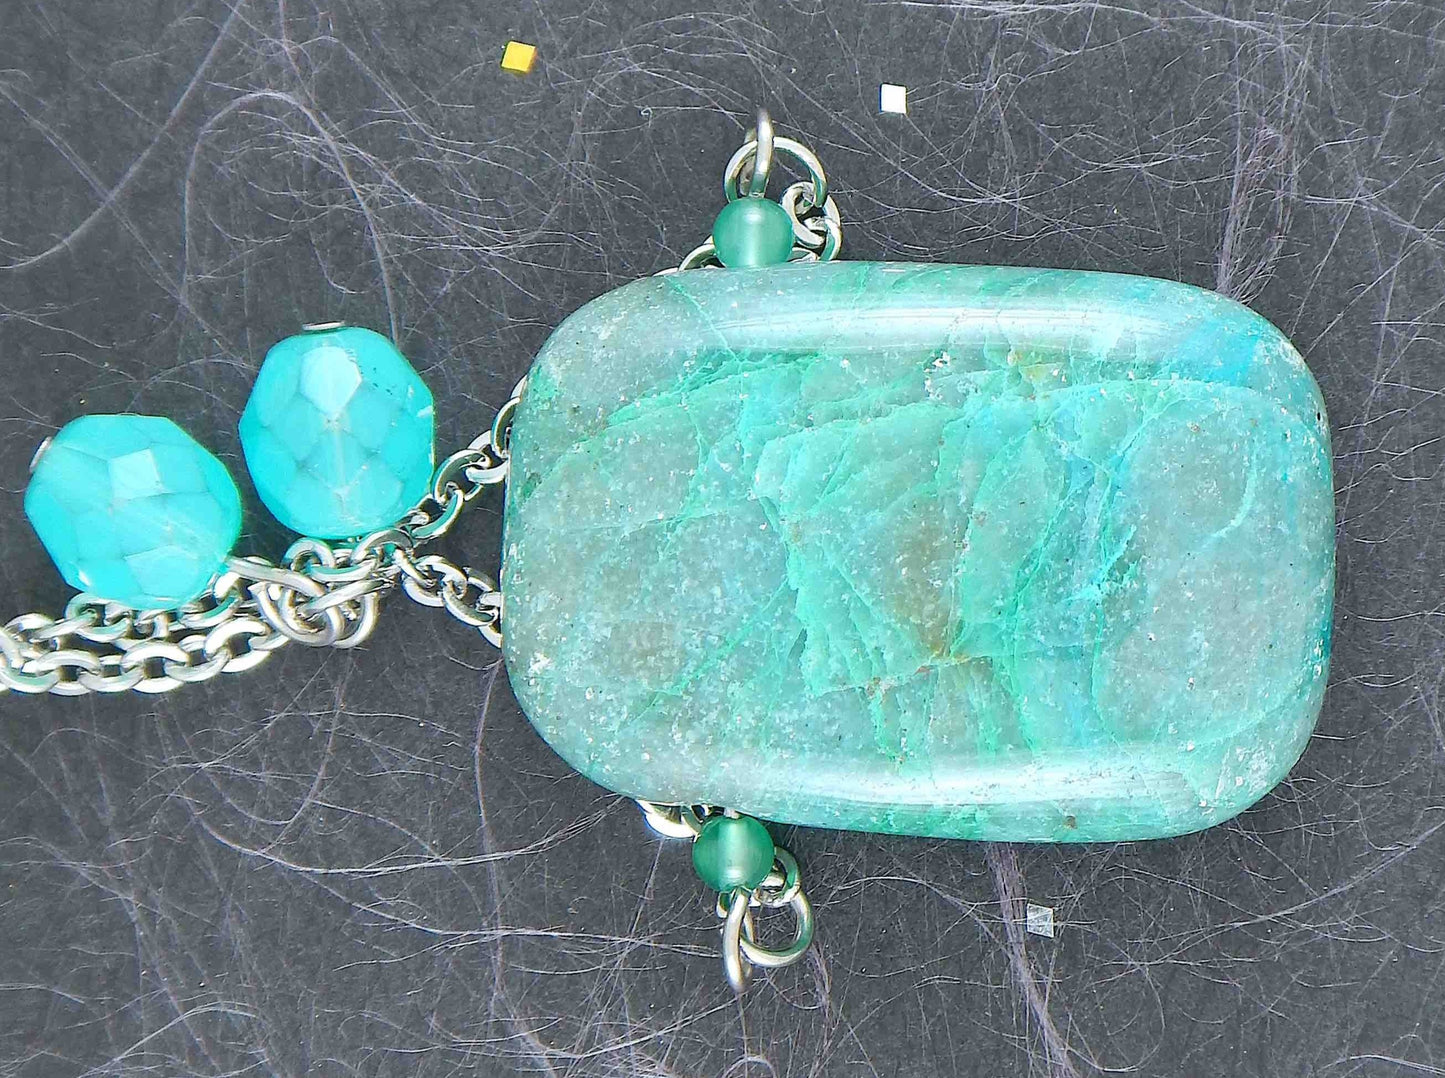 30-inch necklace with large rectangular blue-green chrysocolla stone pendant, triangular layout, matching glass beads, stainless steel chain